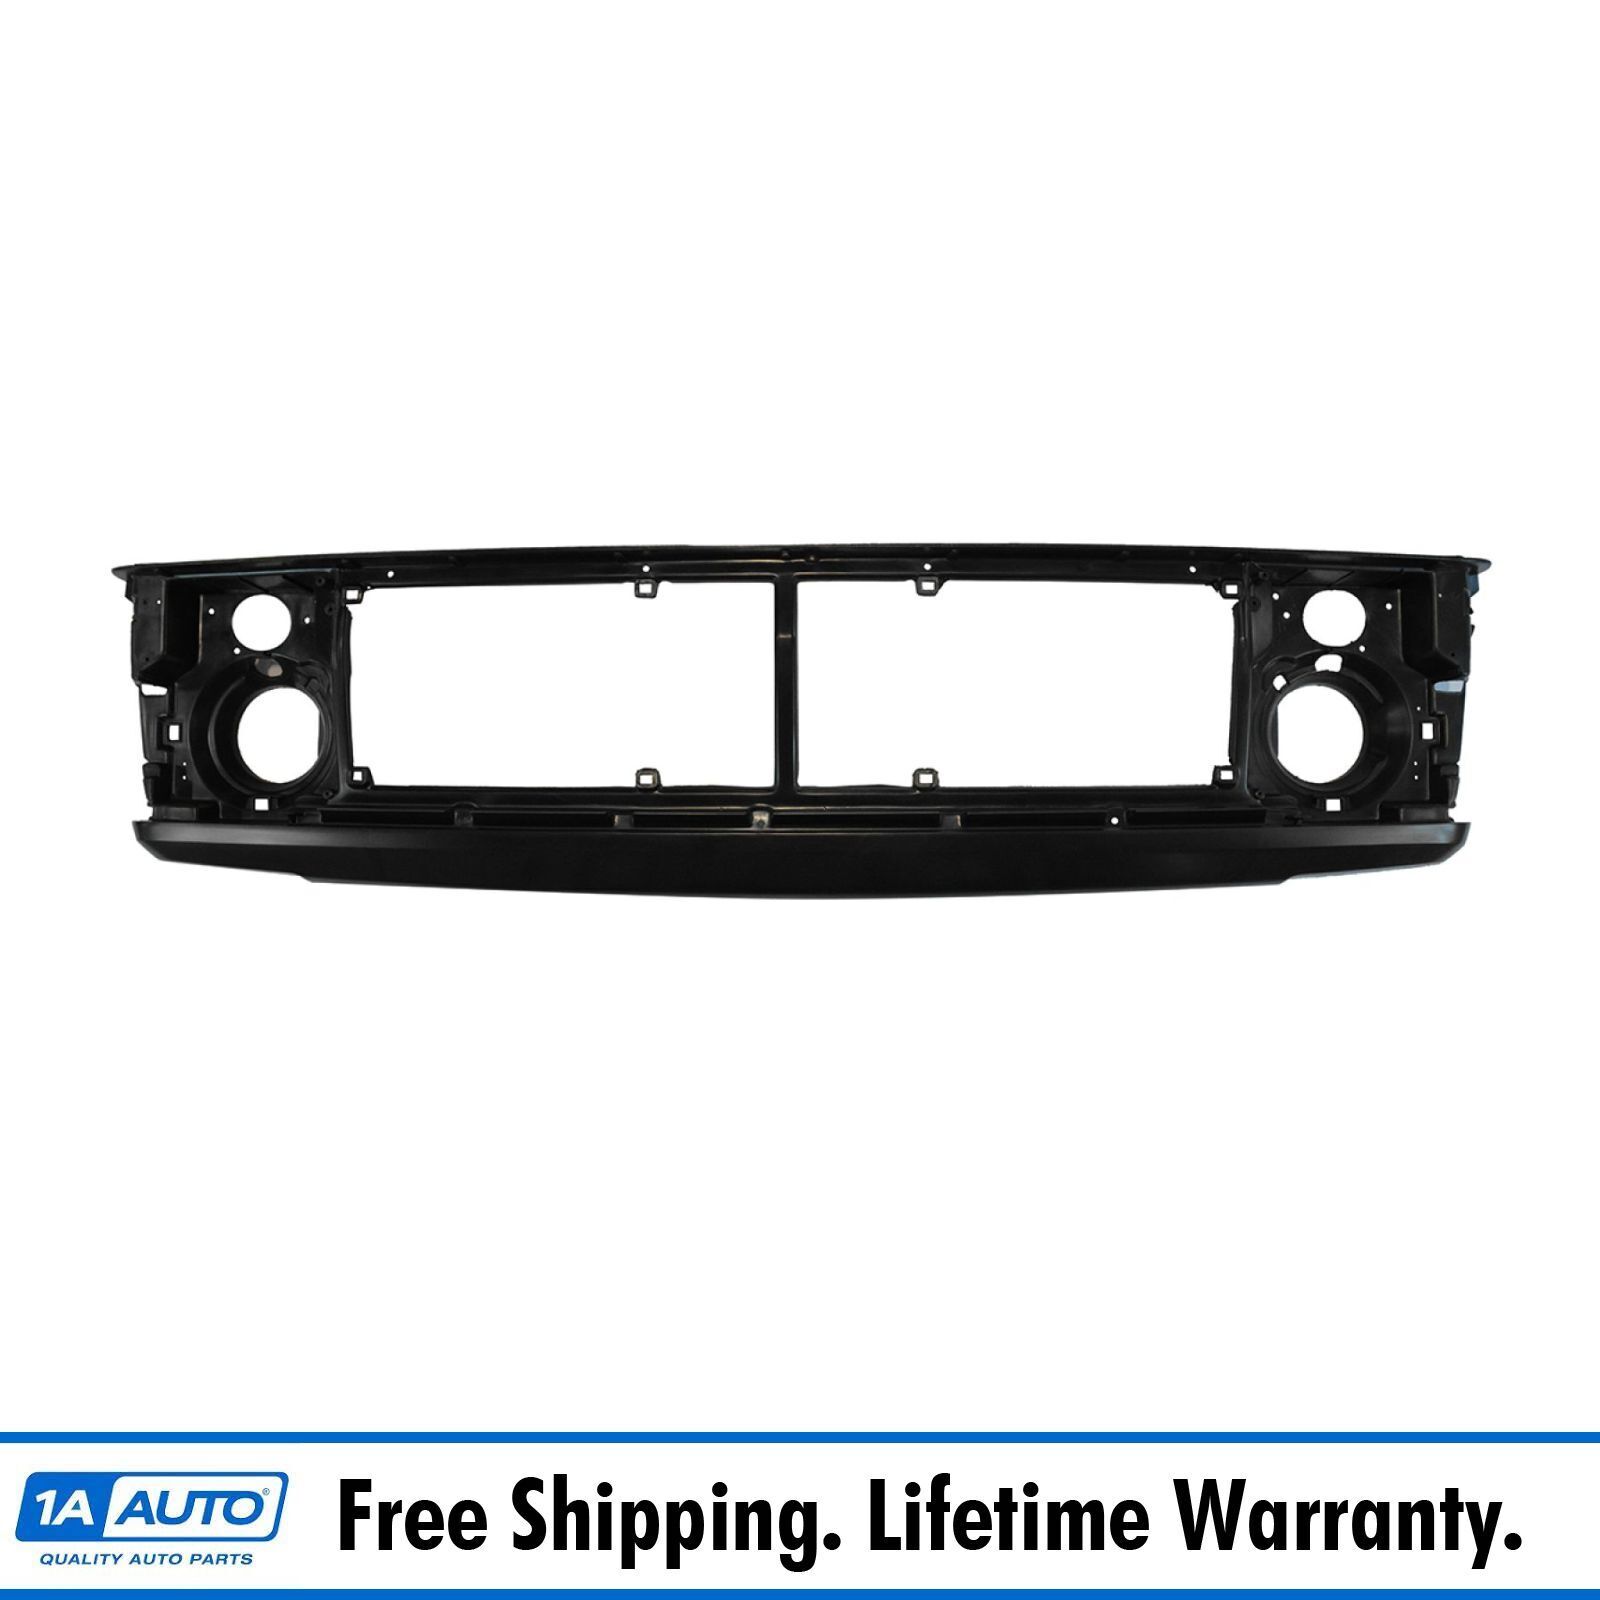 Header Panel Headlight Mounting Front for 91-96 Jeep Cherokee Comanche